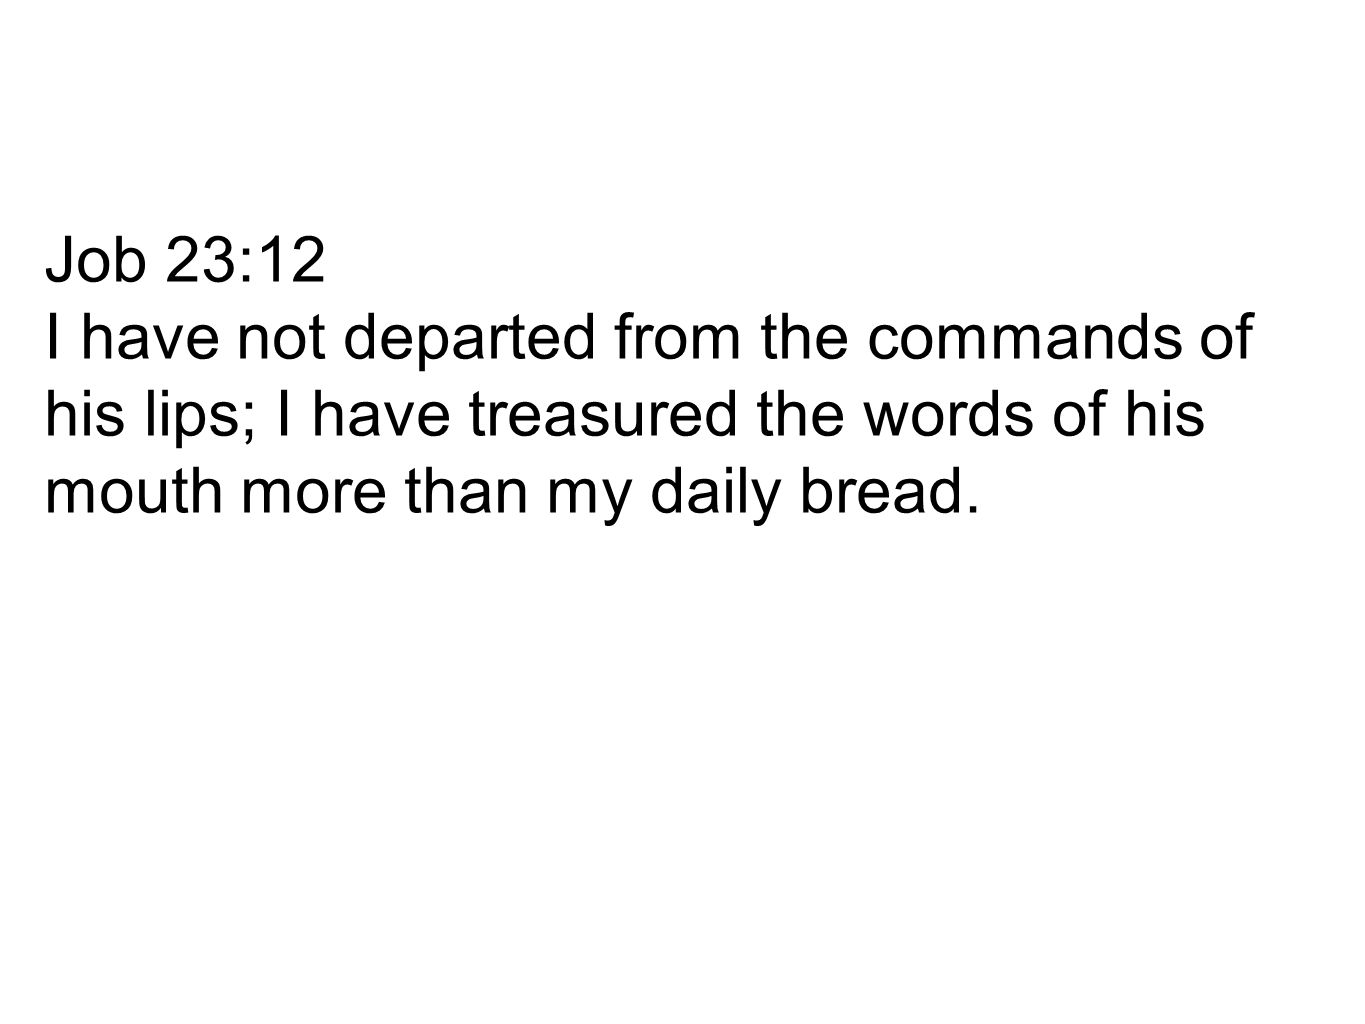 Job 23:12 I have not departed from the commands of his lips; I have treasured the words of his mouth more than my daily bread.